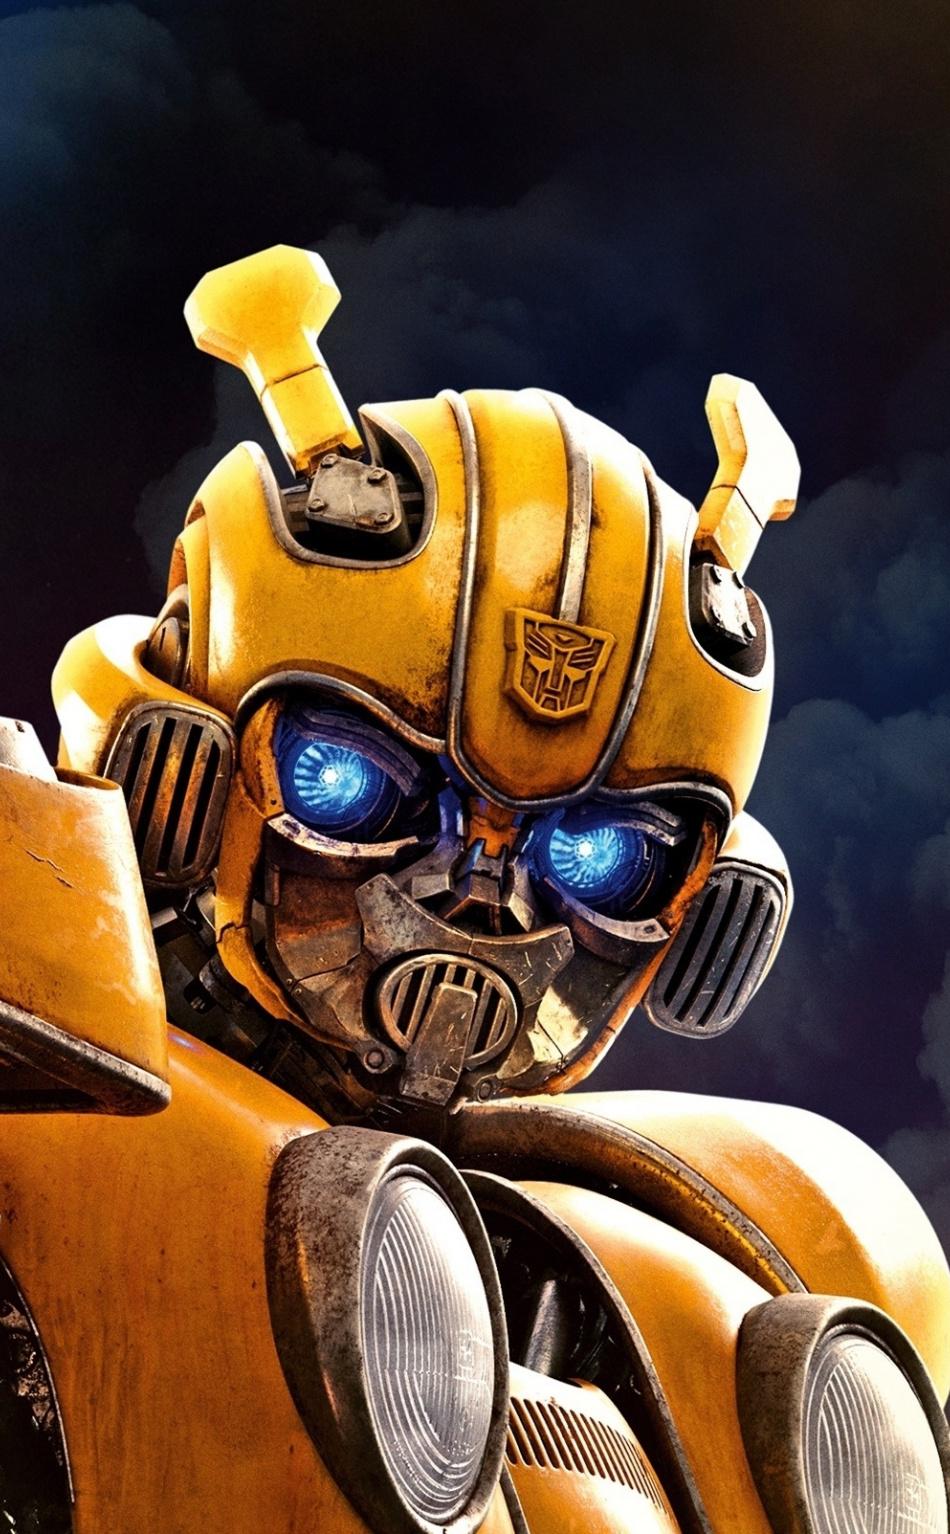 Download 950x1534 wallpaper bumblebee, transformers, 2018 movie, iphone, 950x1534 HD image, background, 15248